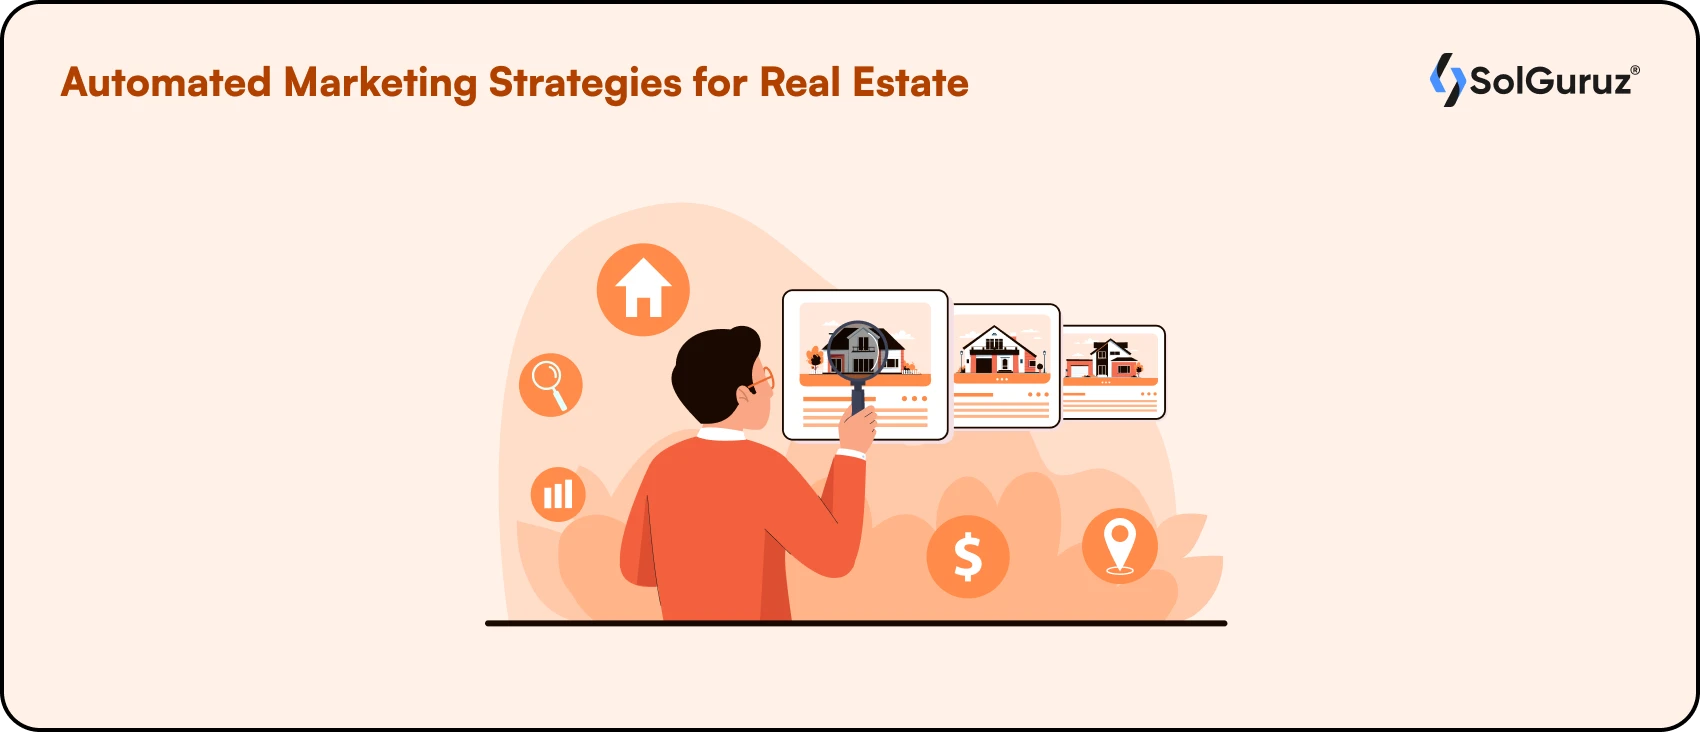 Real Estate Marketing Automation to Improve Engagement